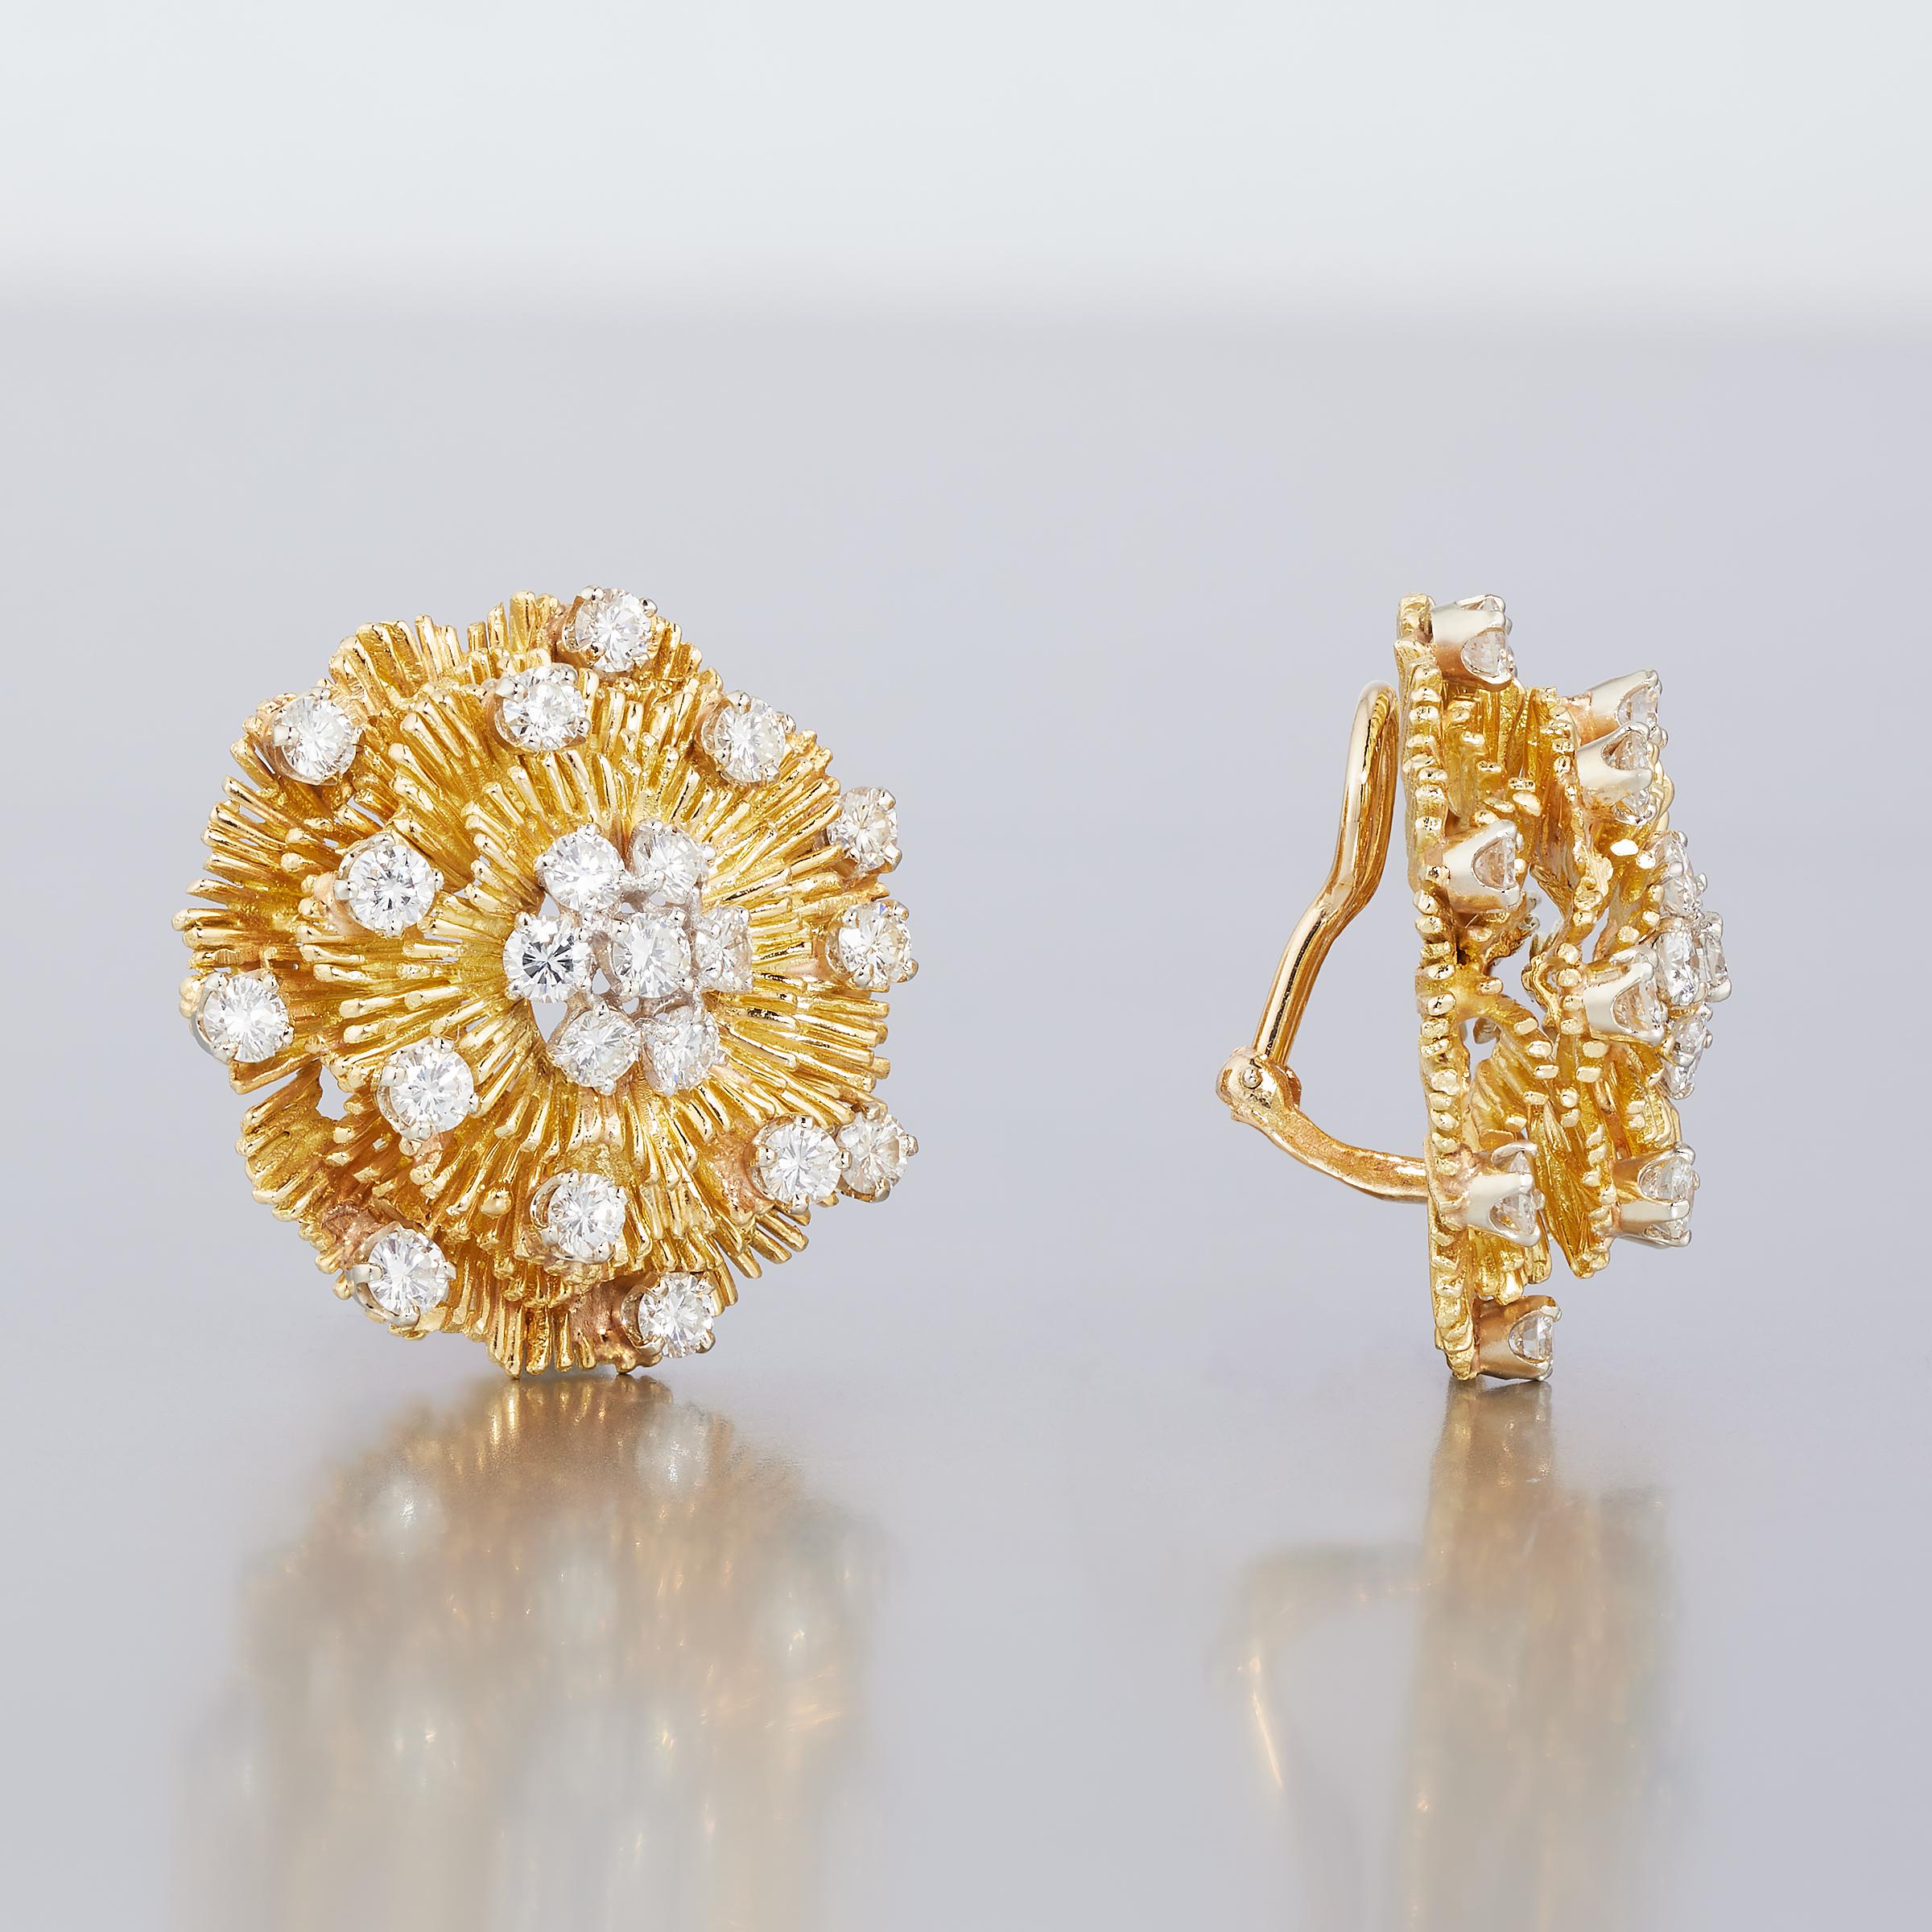 Exceptional pair of mid-century Hammerman Brothers earrings radiating with sparkle of approximately 5 carats of high-quality diamonds sprinkled across a finely textured and multi-layered 18 karat yellow gold flower base. A wonderful example of